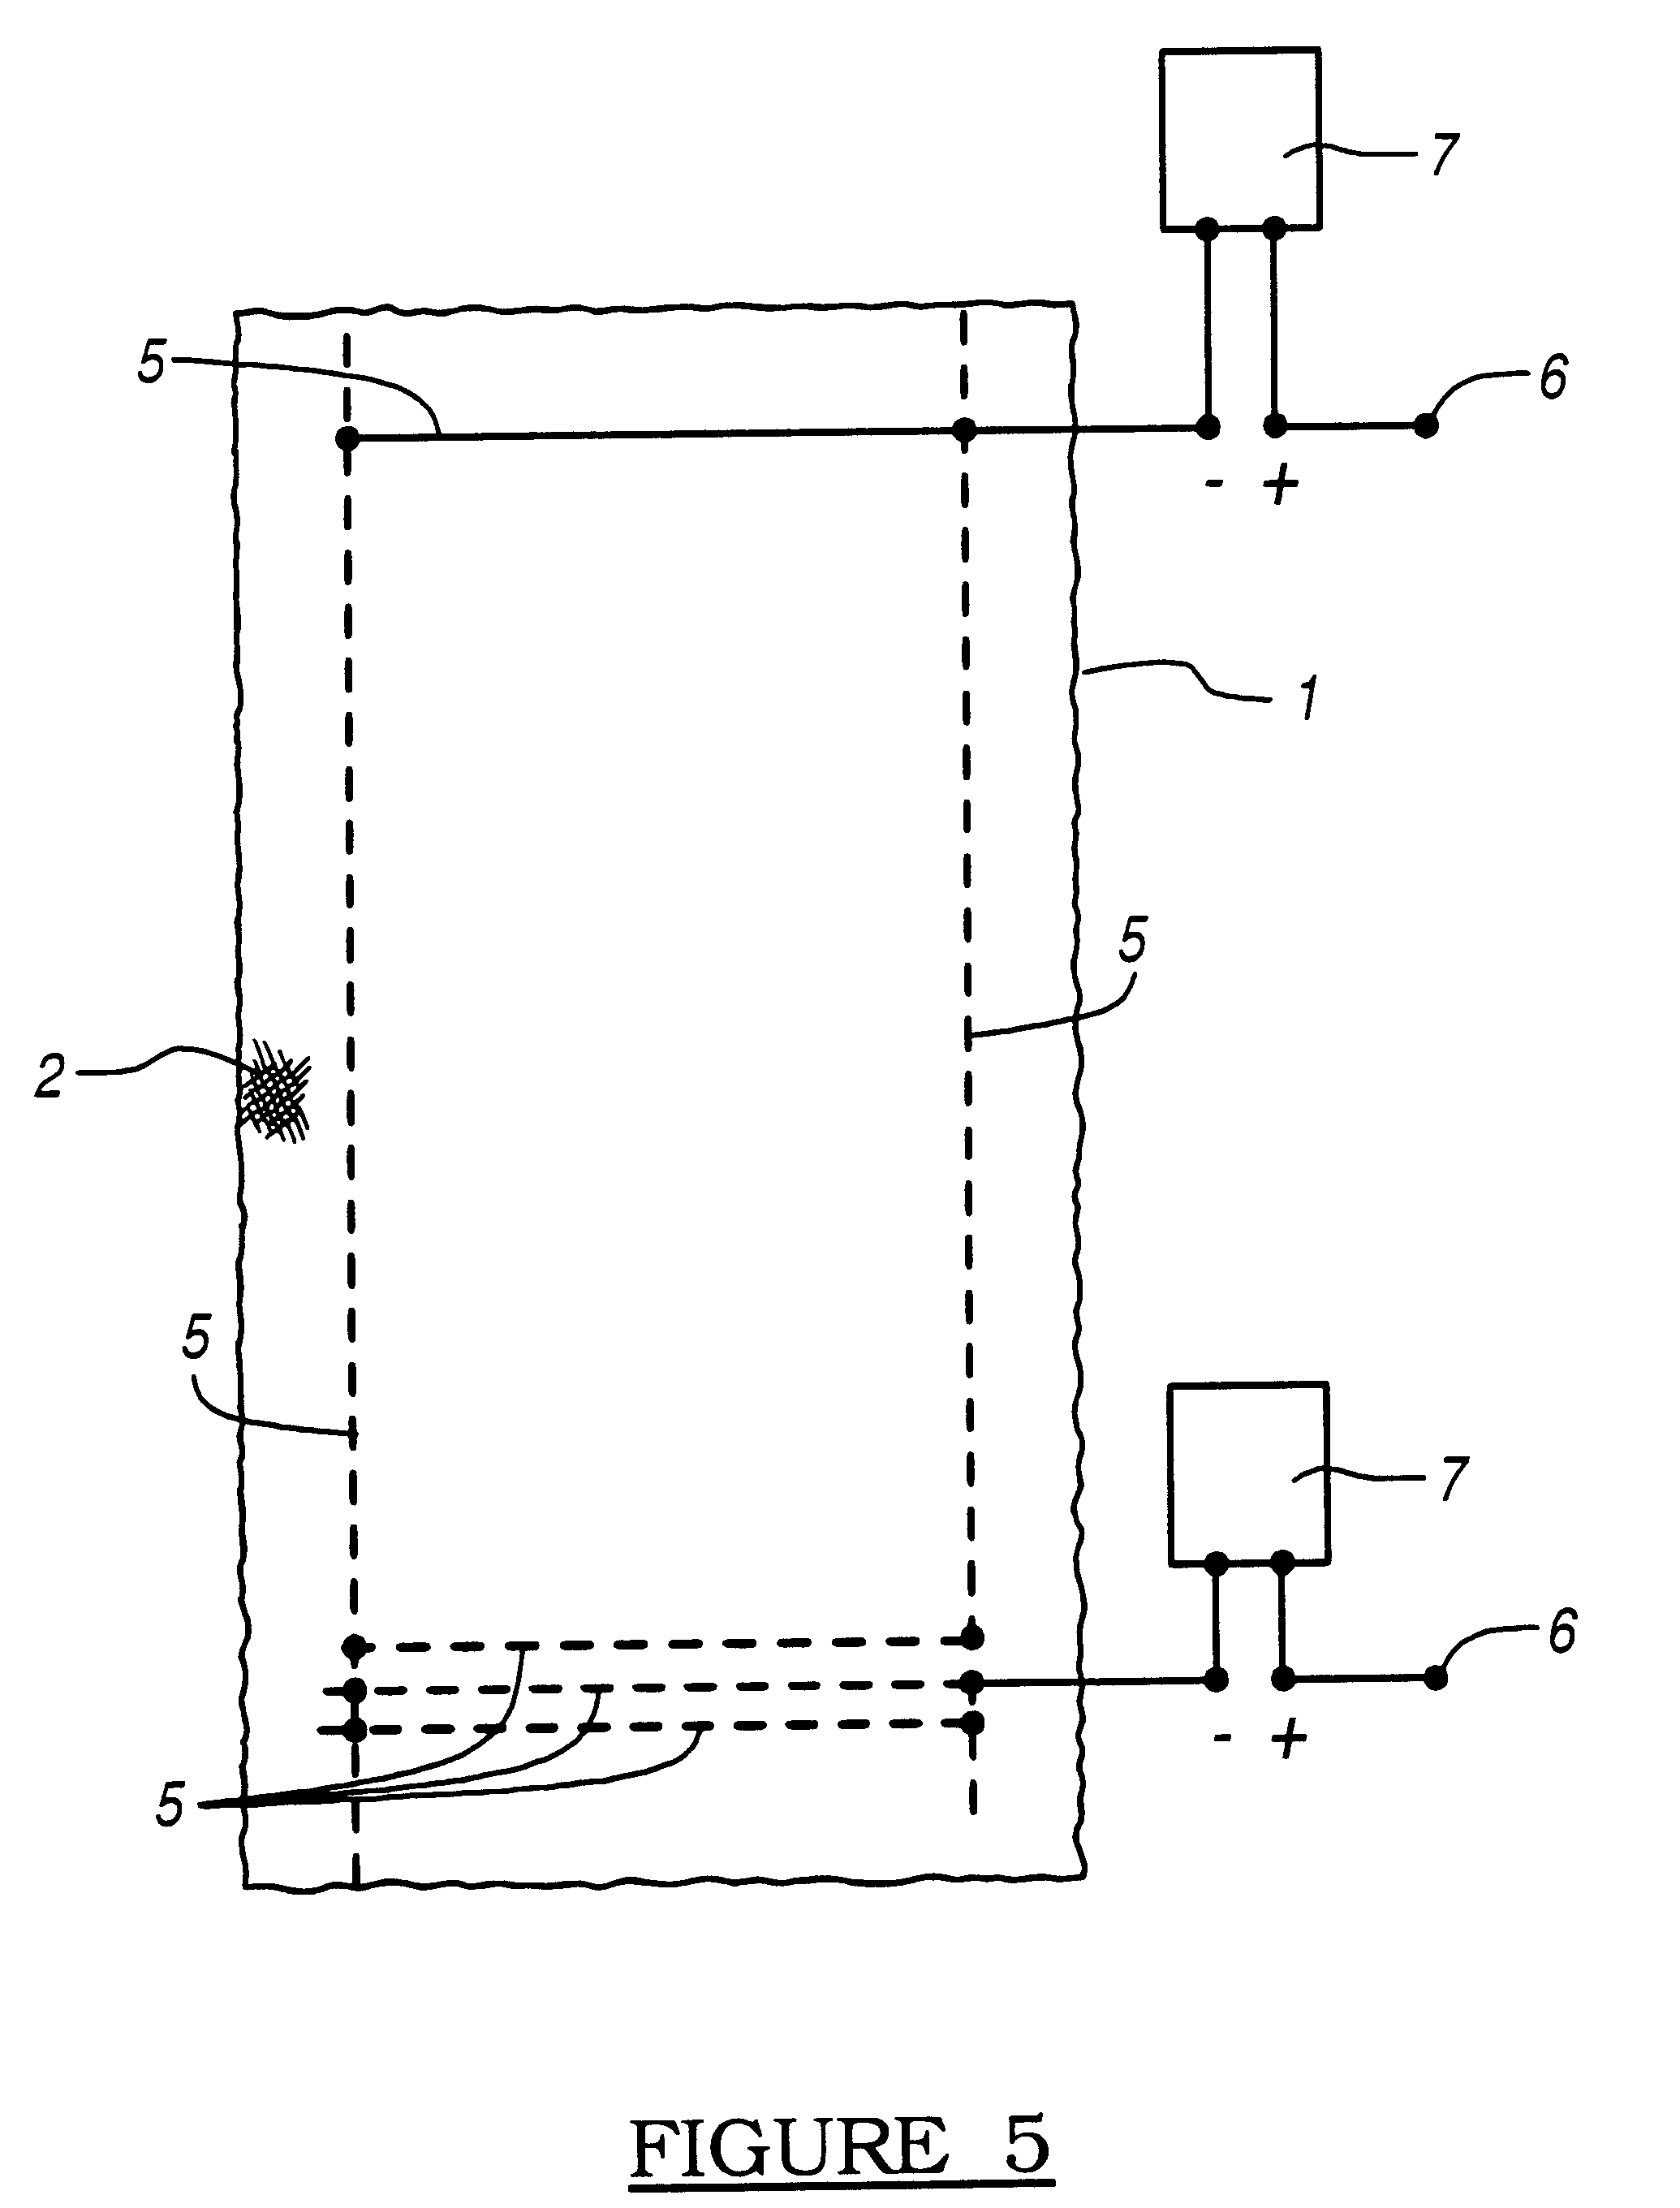 Method for controlling the amount of ionized gases and/or particles over roads, streets, open spaces or the like